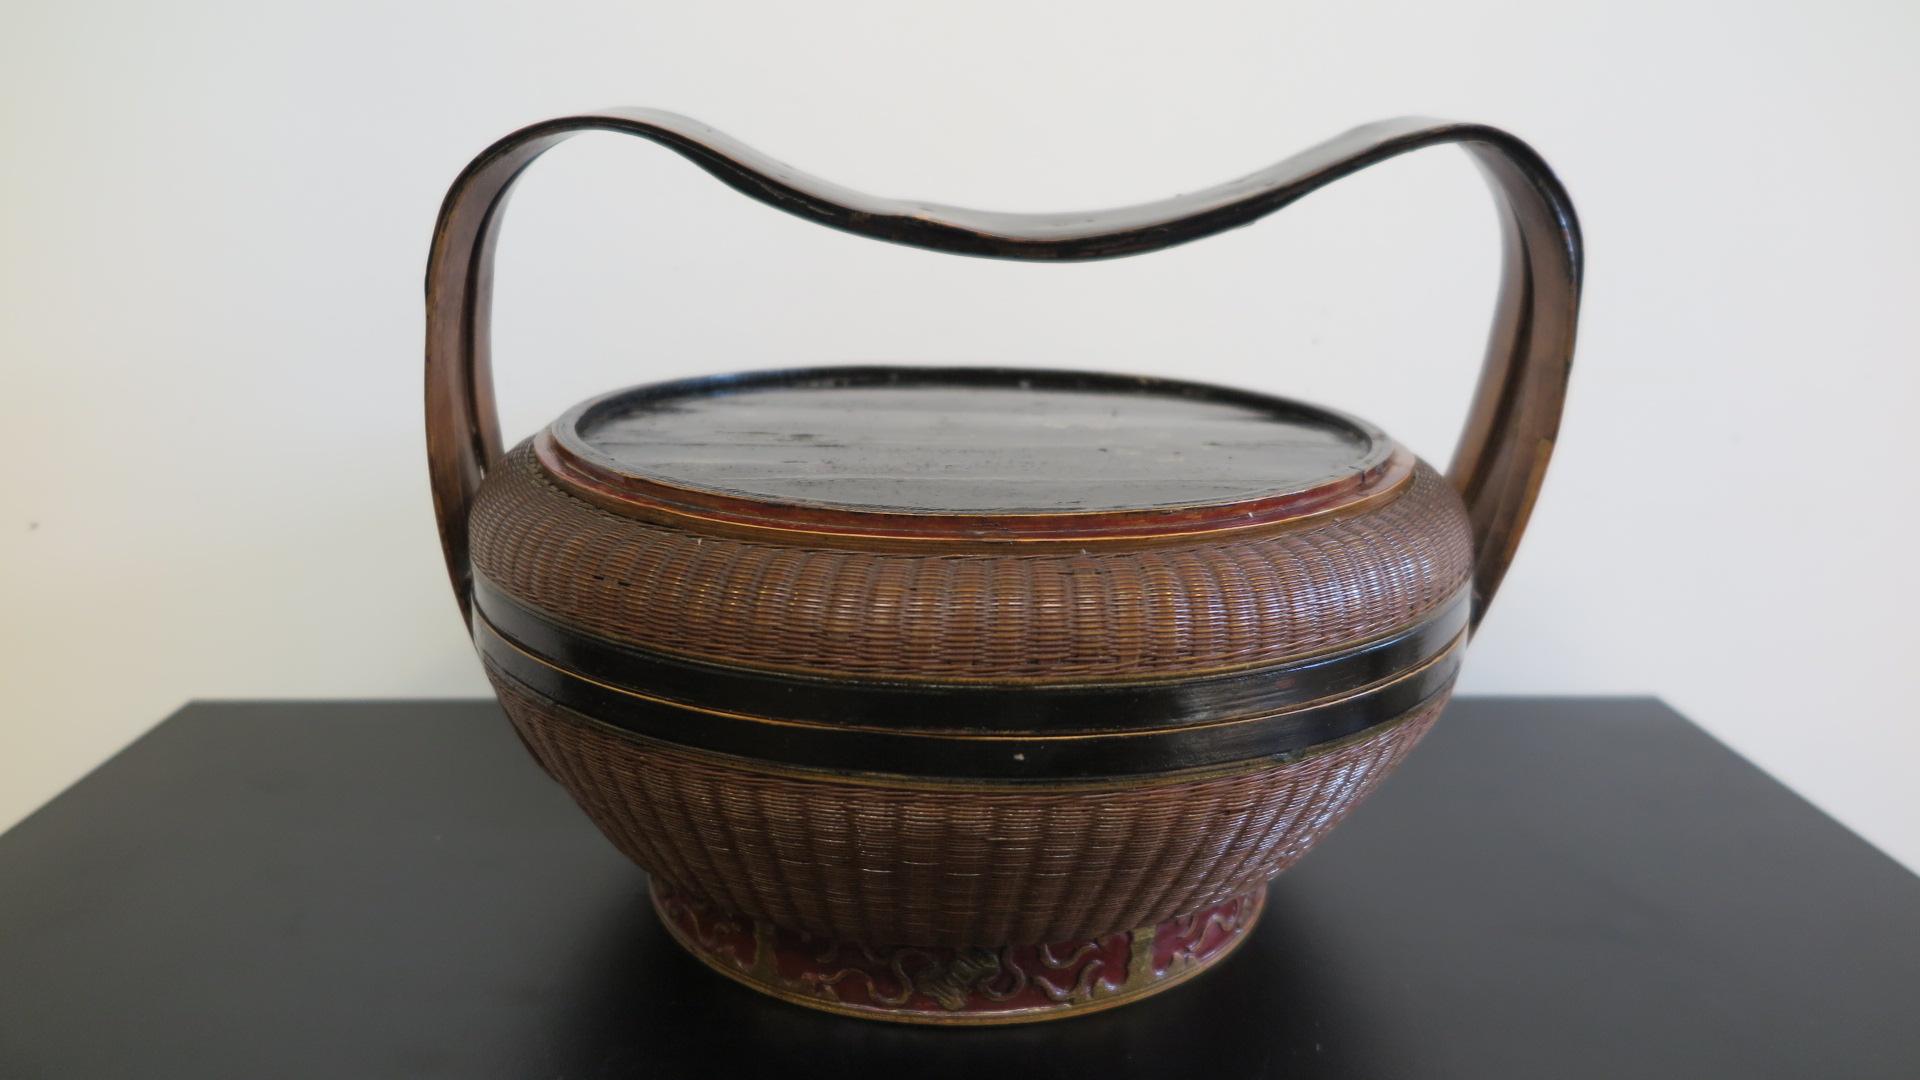 Antique Chinese wedding basket of woven rattan and bamboo. Called a wedding basket as gifts from the wedding are collected and offered in such types of baskets. Completely hand made involving intricate weaving skills for a specific event. Lightly